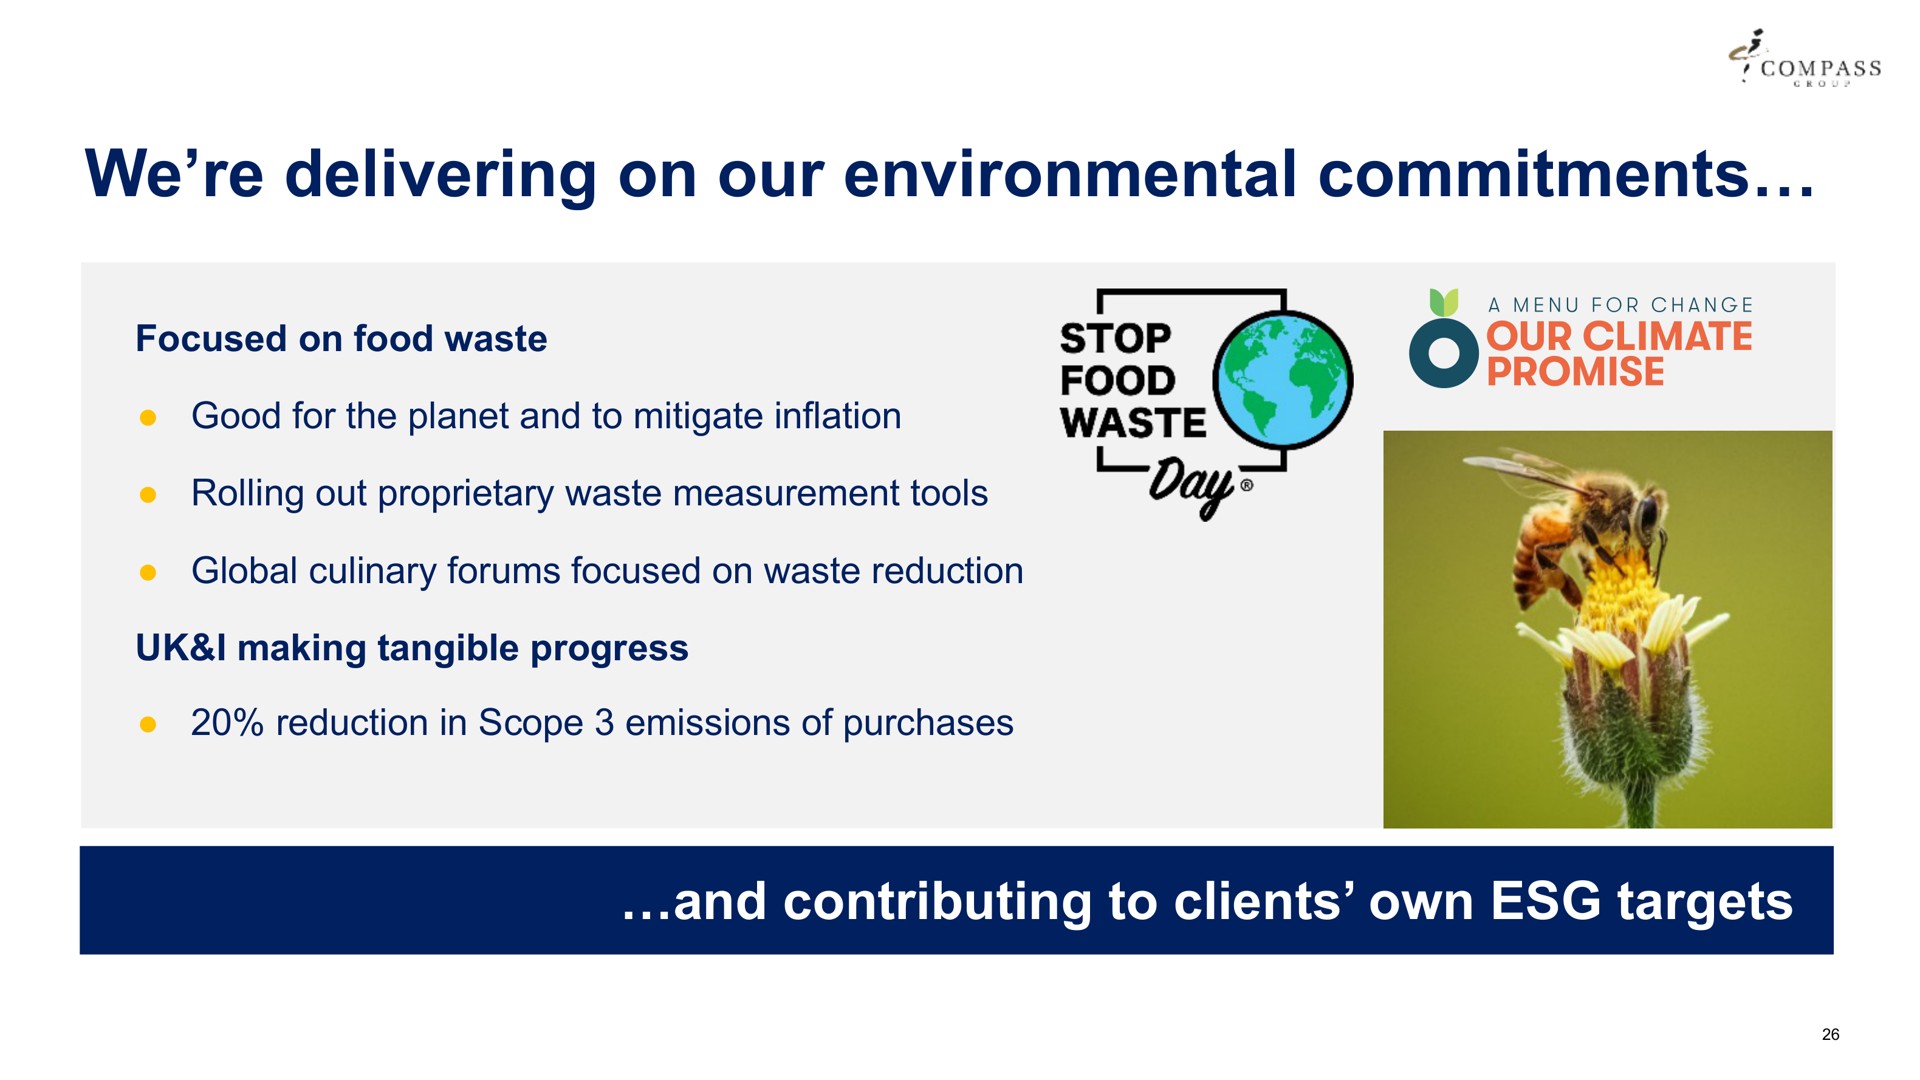 we delivering on our environmental commitments a compass focused food waste good for the planet and to mitigate inflation rolling out proprietary waste measurement tools aye global culinary forums focused waste reduction making tangible progress reduction in scope emissions of purchases climate promise | Compass Group